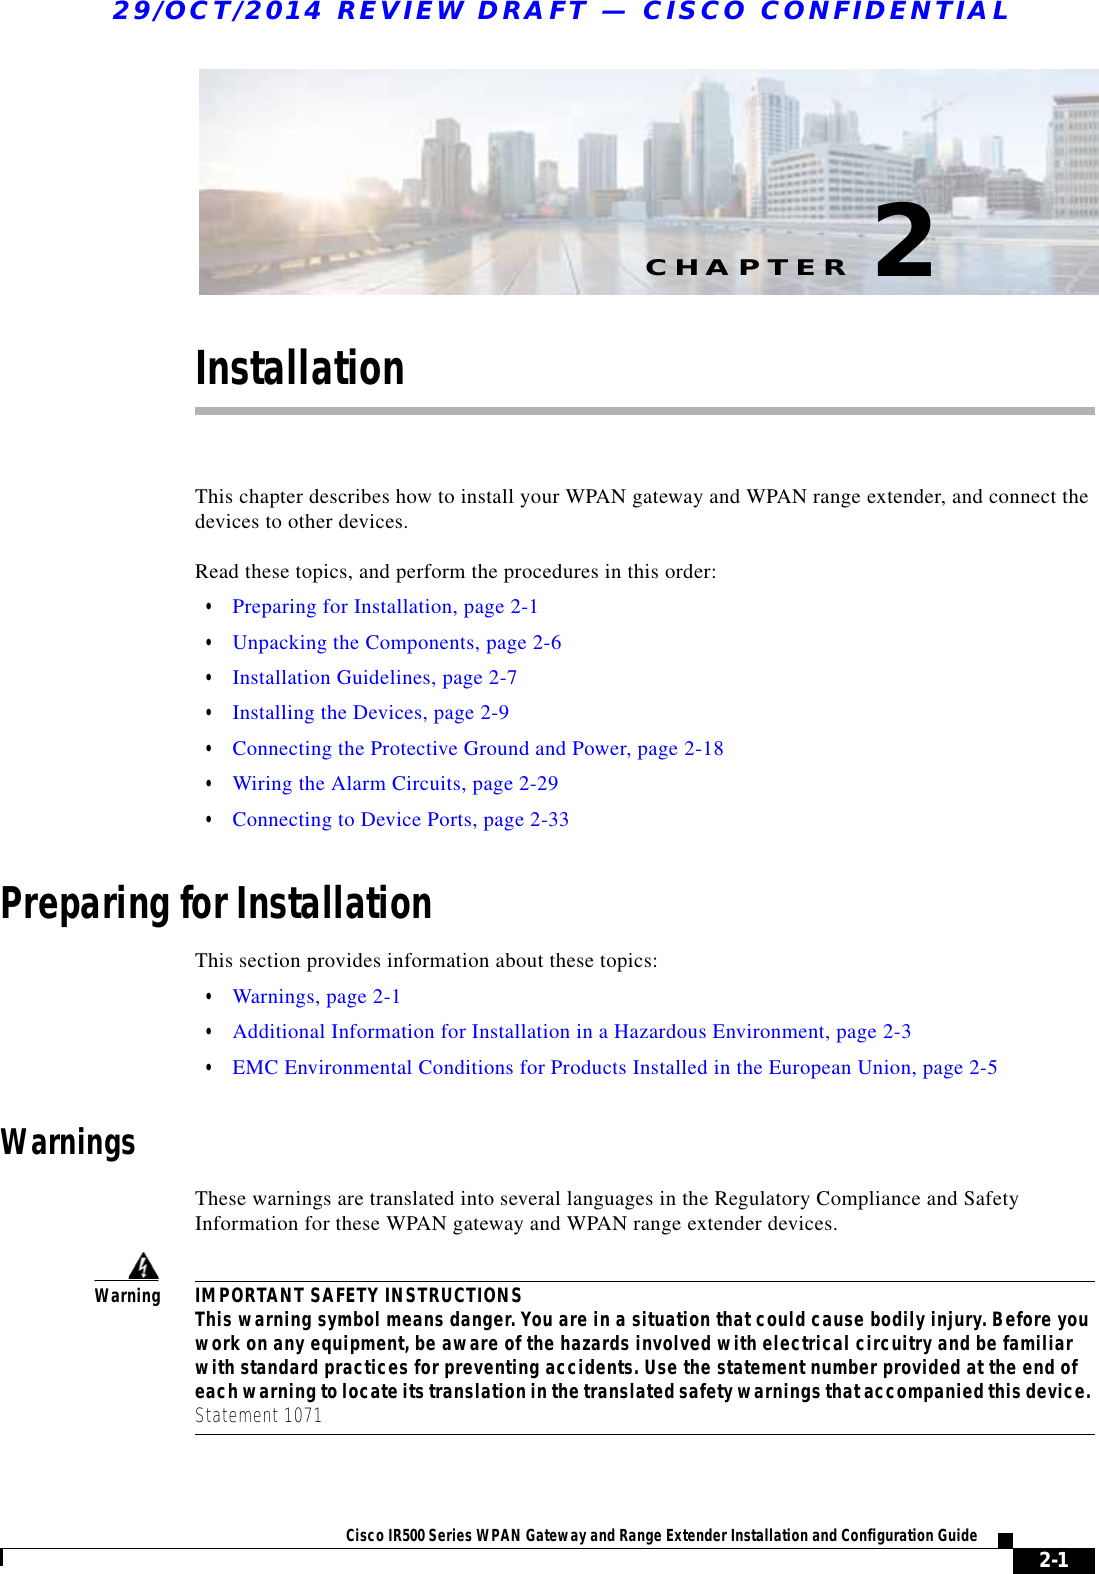 CHAPTER29/OCT/2014 REVIEW DRAFT — CISCO CONFIDENTIAL2-1Cisco IR500 Series WPAN Gateway and Range Extender Installation and Configuration Guide 2InstallationThis chapter describes how to install your WPAN gateway and WPAN range extender, and connect the devices to other devices.  Read these topics, and perform the procedures in this order:  • Preparing for Installation, page 2-1  • Unpacking the Components, page 2-6  • Installation Guidelines, page 2-7  • Installing the Devices, page 2-9  • Connecting the Protective Ground and Power, page 2-18  • Wiring the Alarm Circuits, page 2-29  • Connecting to Device Ports, page 2-33Preparing for InstallationThis section provides information about these topics:  • Warnings, page 2-1  • Additional Information for Installation in a Hazardous Environment, page 2-3  • EMC Environmental Conditions for Products Installed in the European Union, page 2-5WarningsThese warnings are translated into several languages in the Regulatory Compliance and Safety Information for these WPAN gateway and WPAN range extender devices.WarningIMPORTANT SAFETY INSTRUCTIONS This warning symbol means danger. You are in a situation that could cause bodily injury. Before you work on any equipment, be aware of the hazards involved with electrical circuitry and be familiar with standard practices for preventing accidents. Use the statement number provided at the end of each warning to locate its translation in the translated safety warnings that accompanied this device. Statement 1071